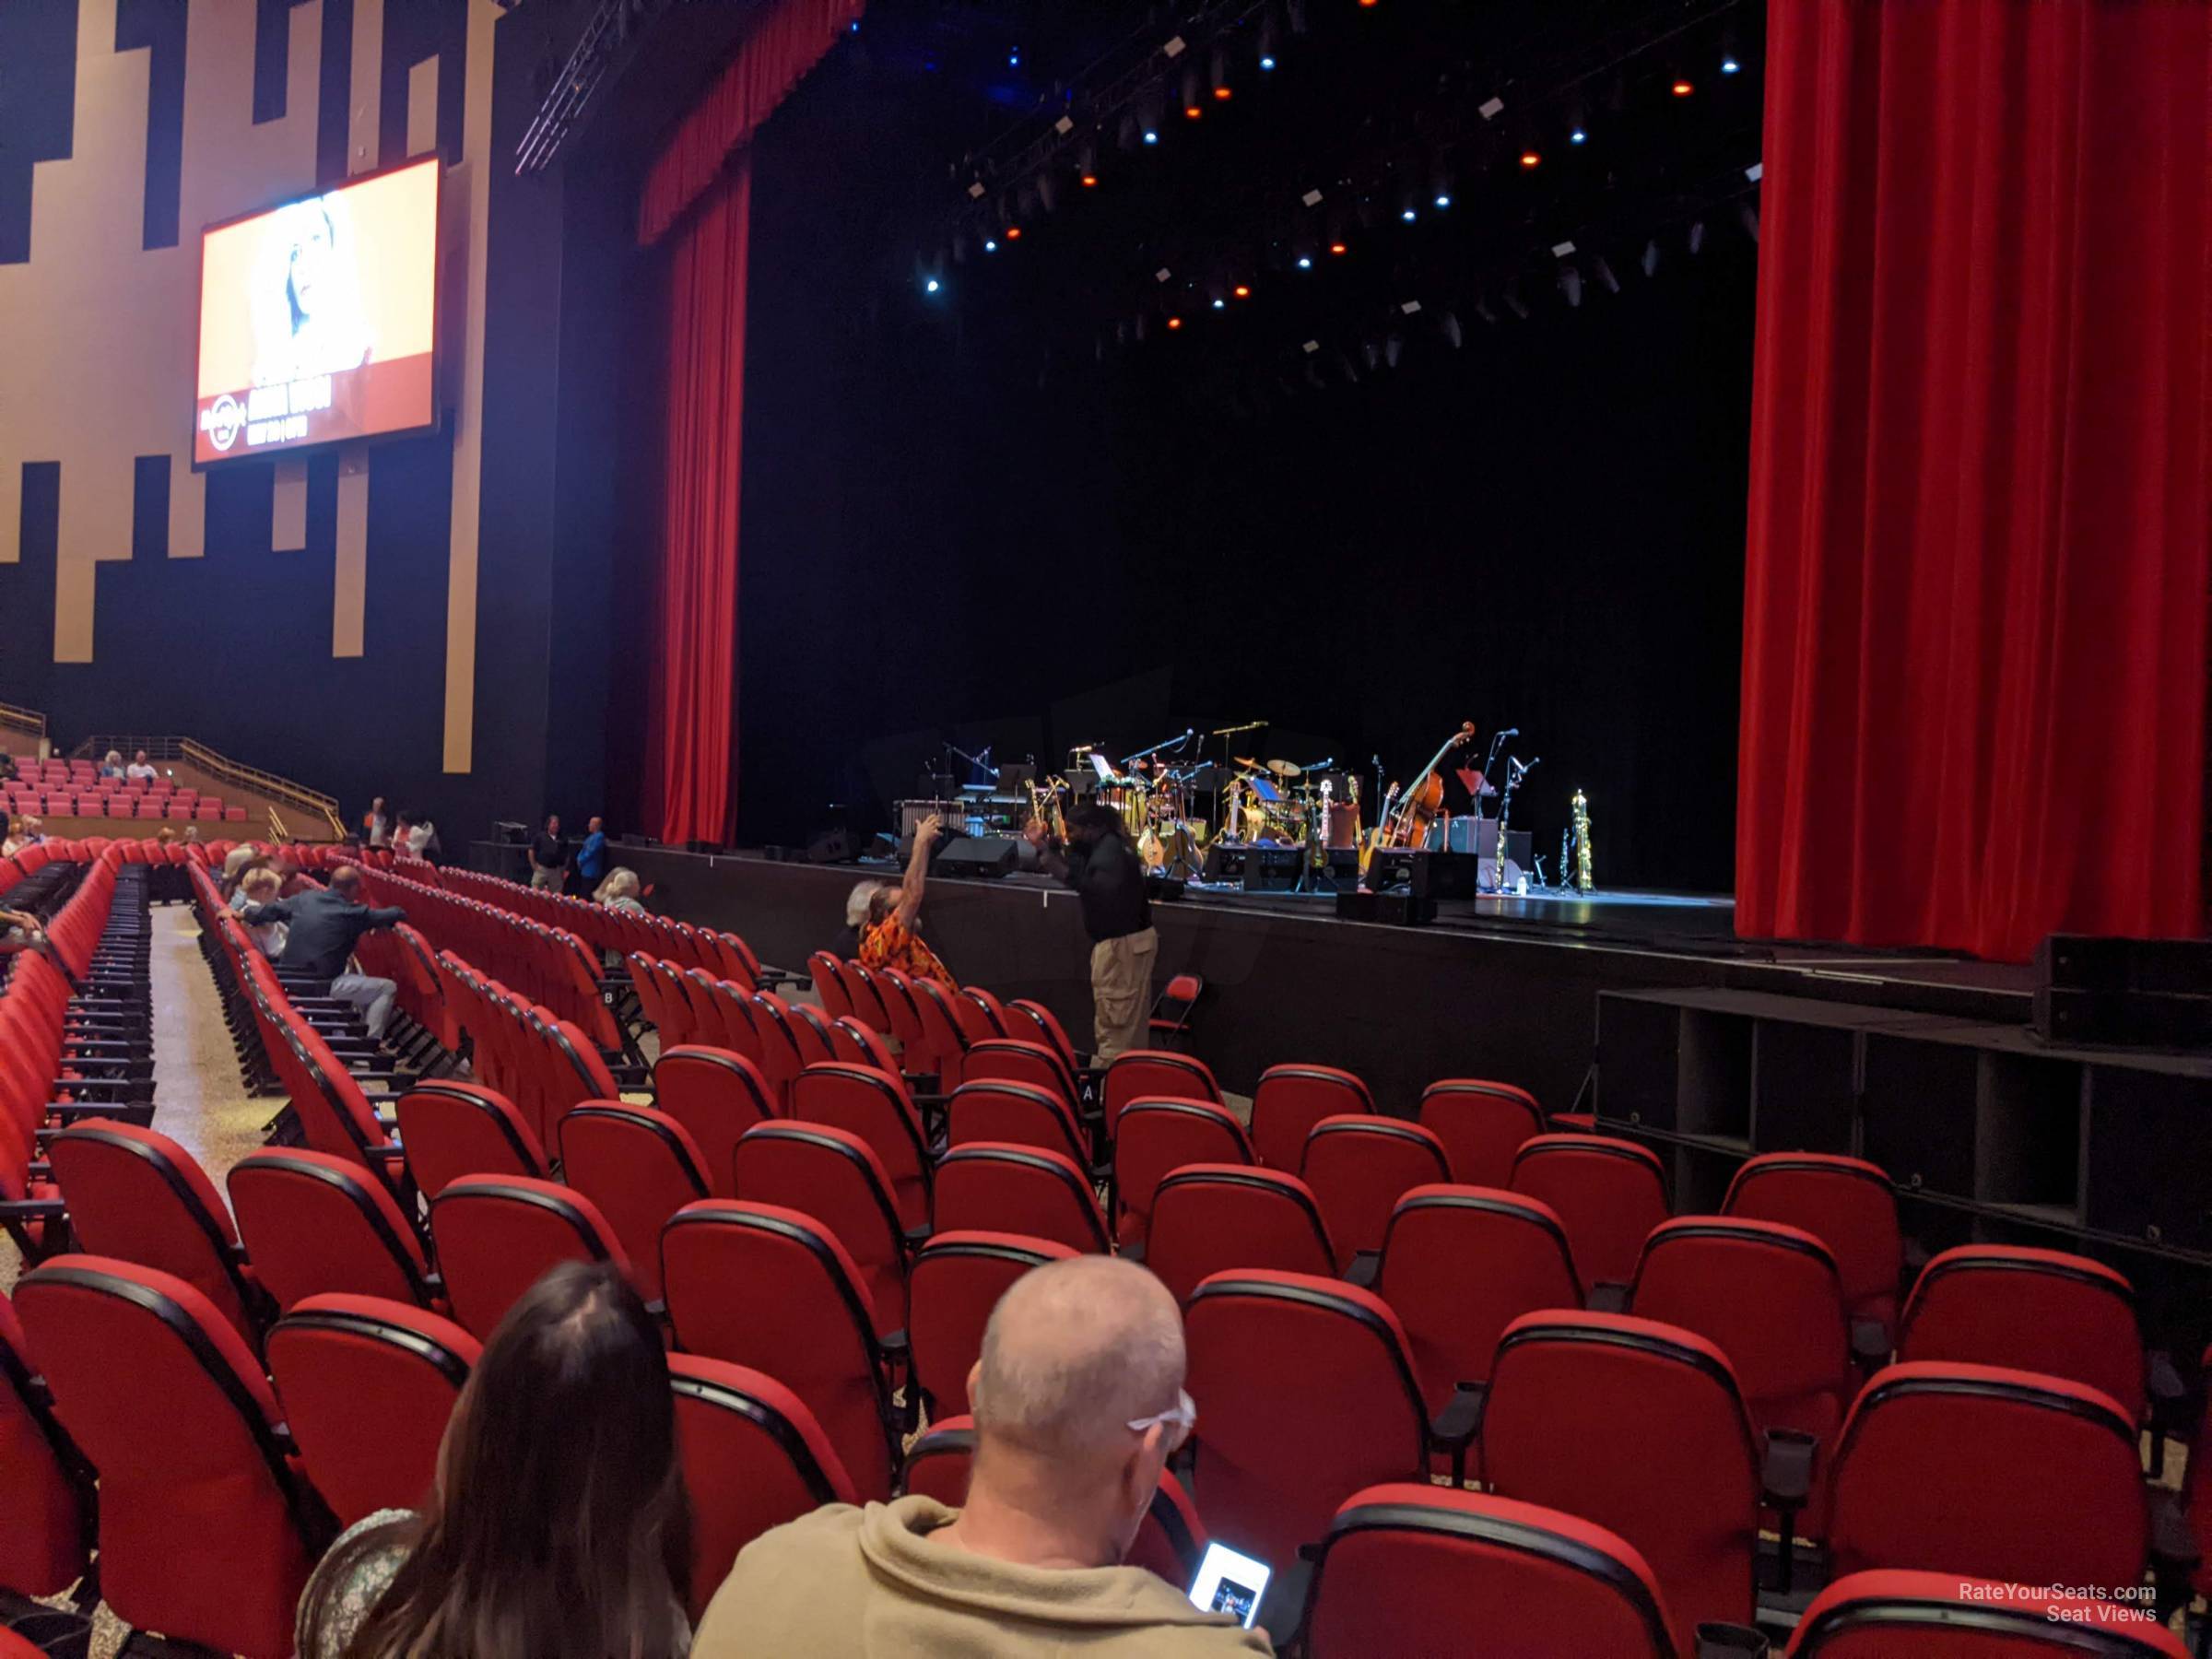 section 104, row a seat view  - hard rock live hollywood